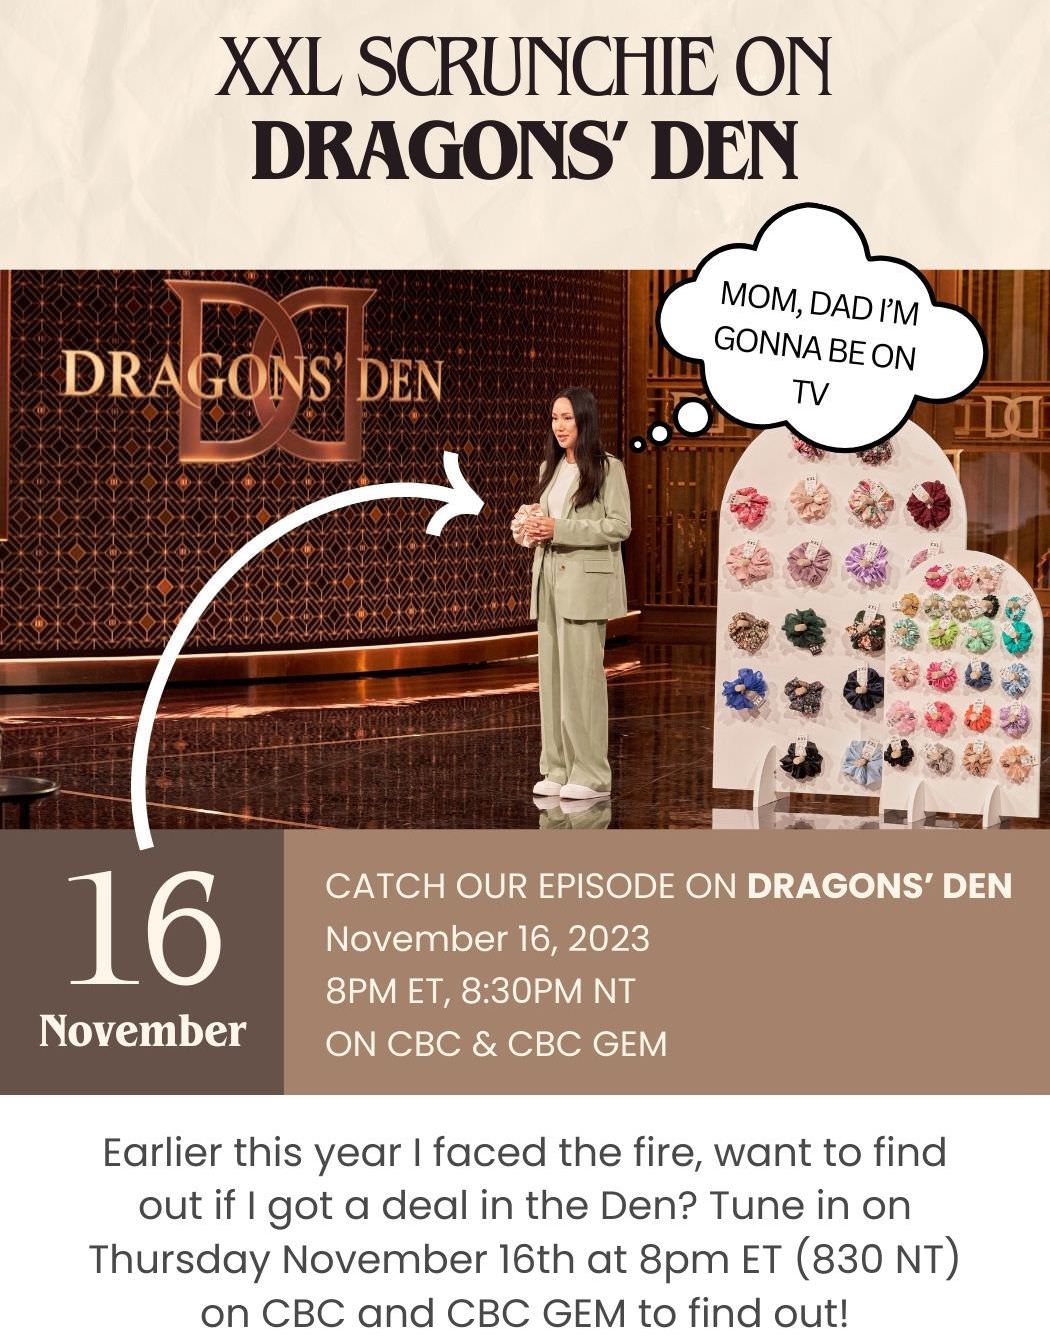 XXL Scrunchie CEO Tina Nguyen pitched on Dragons' Den Canada. It will be airing in the new season 18 episode 9. Find out if she got a deal, or not as she faced the fire in the den.